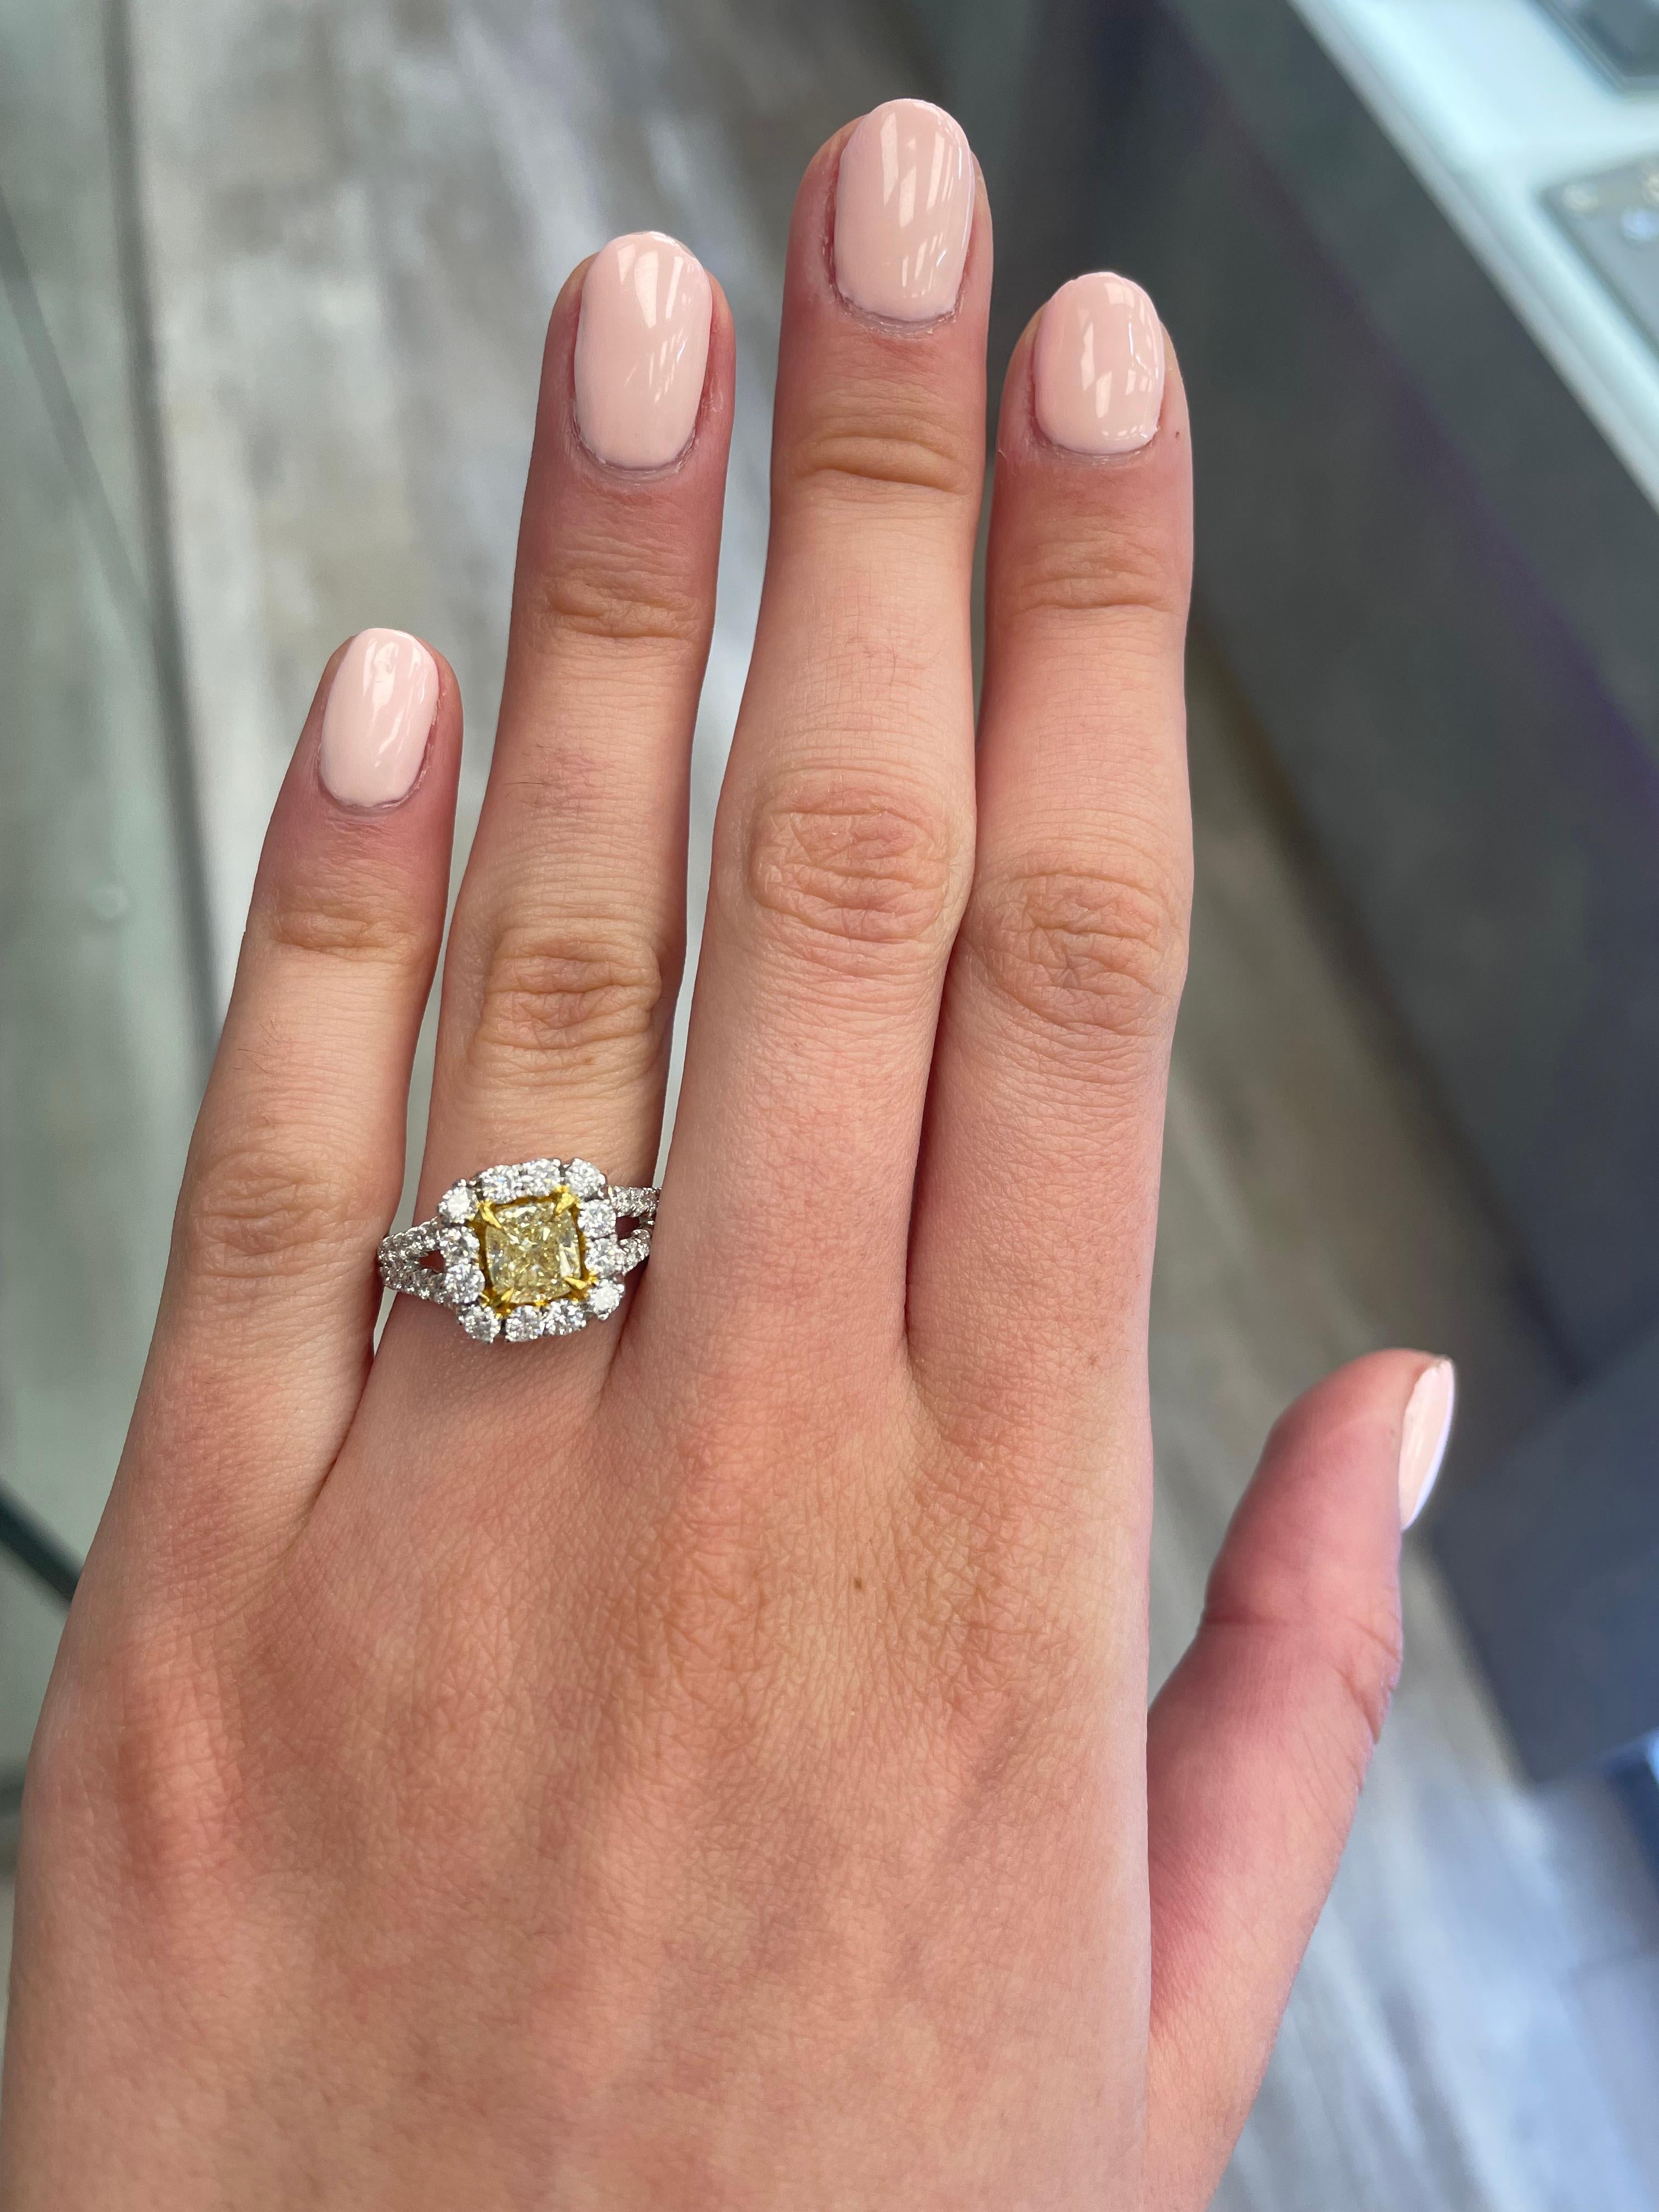 Stunning modern EGL certified yellow diamond with halo ring, two-tone 18k yellow and white gold. By Alexander Beverly Hills
2.03 carats total diamond weight.
1.01 carat cushion cut Fancy Intense Yellow color and SI2 clarity diamond, EGL graded.